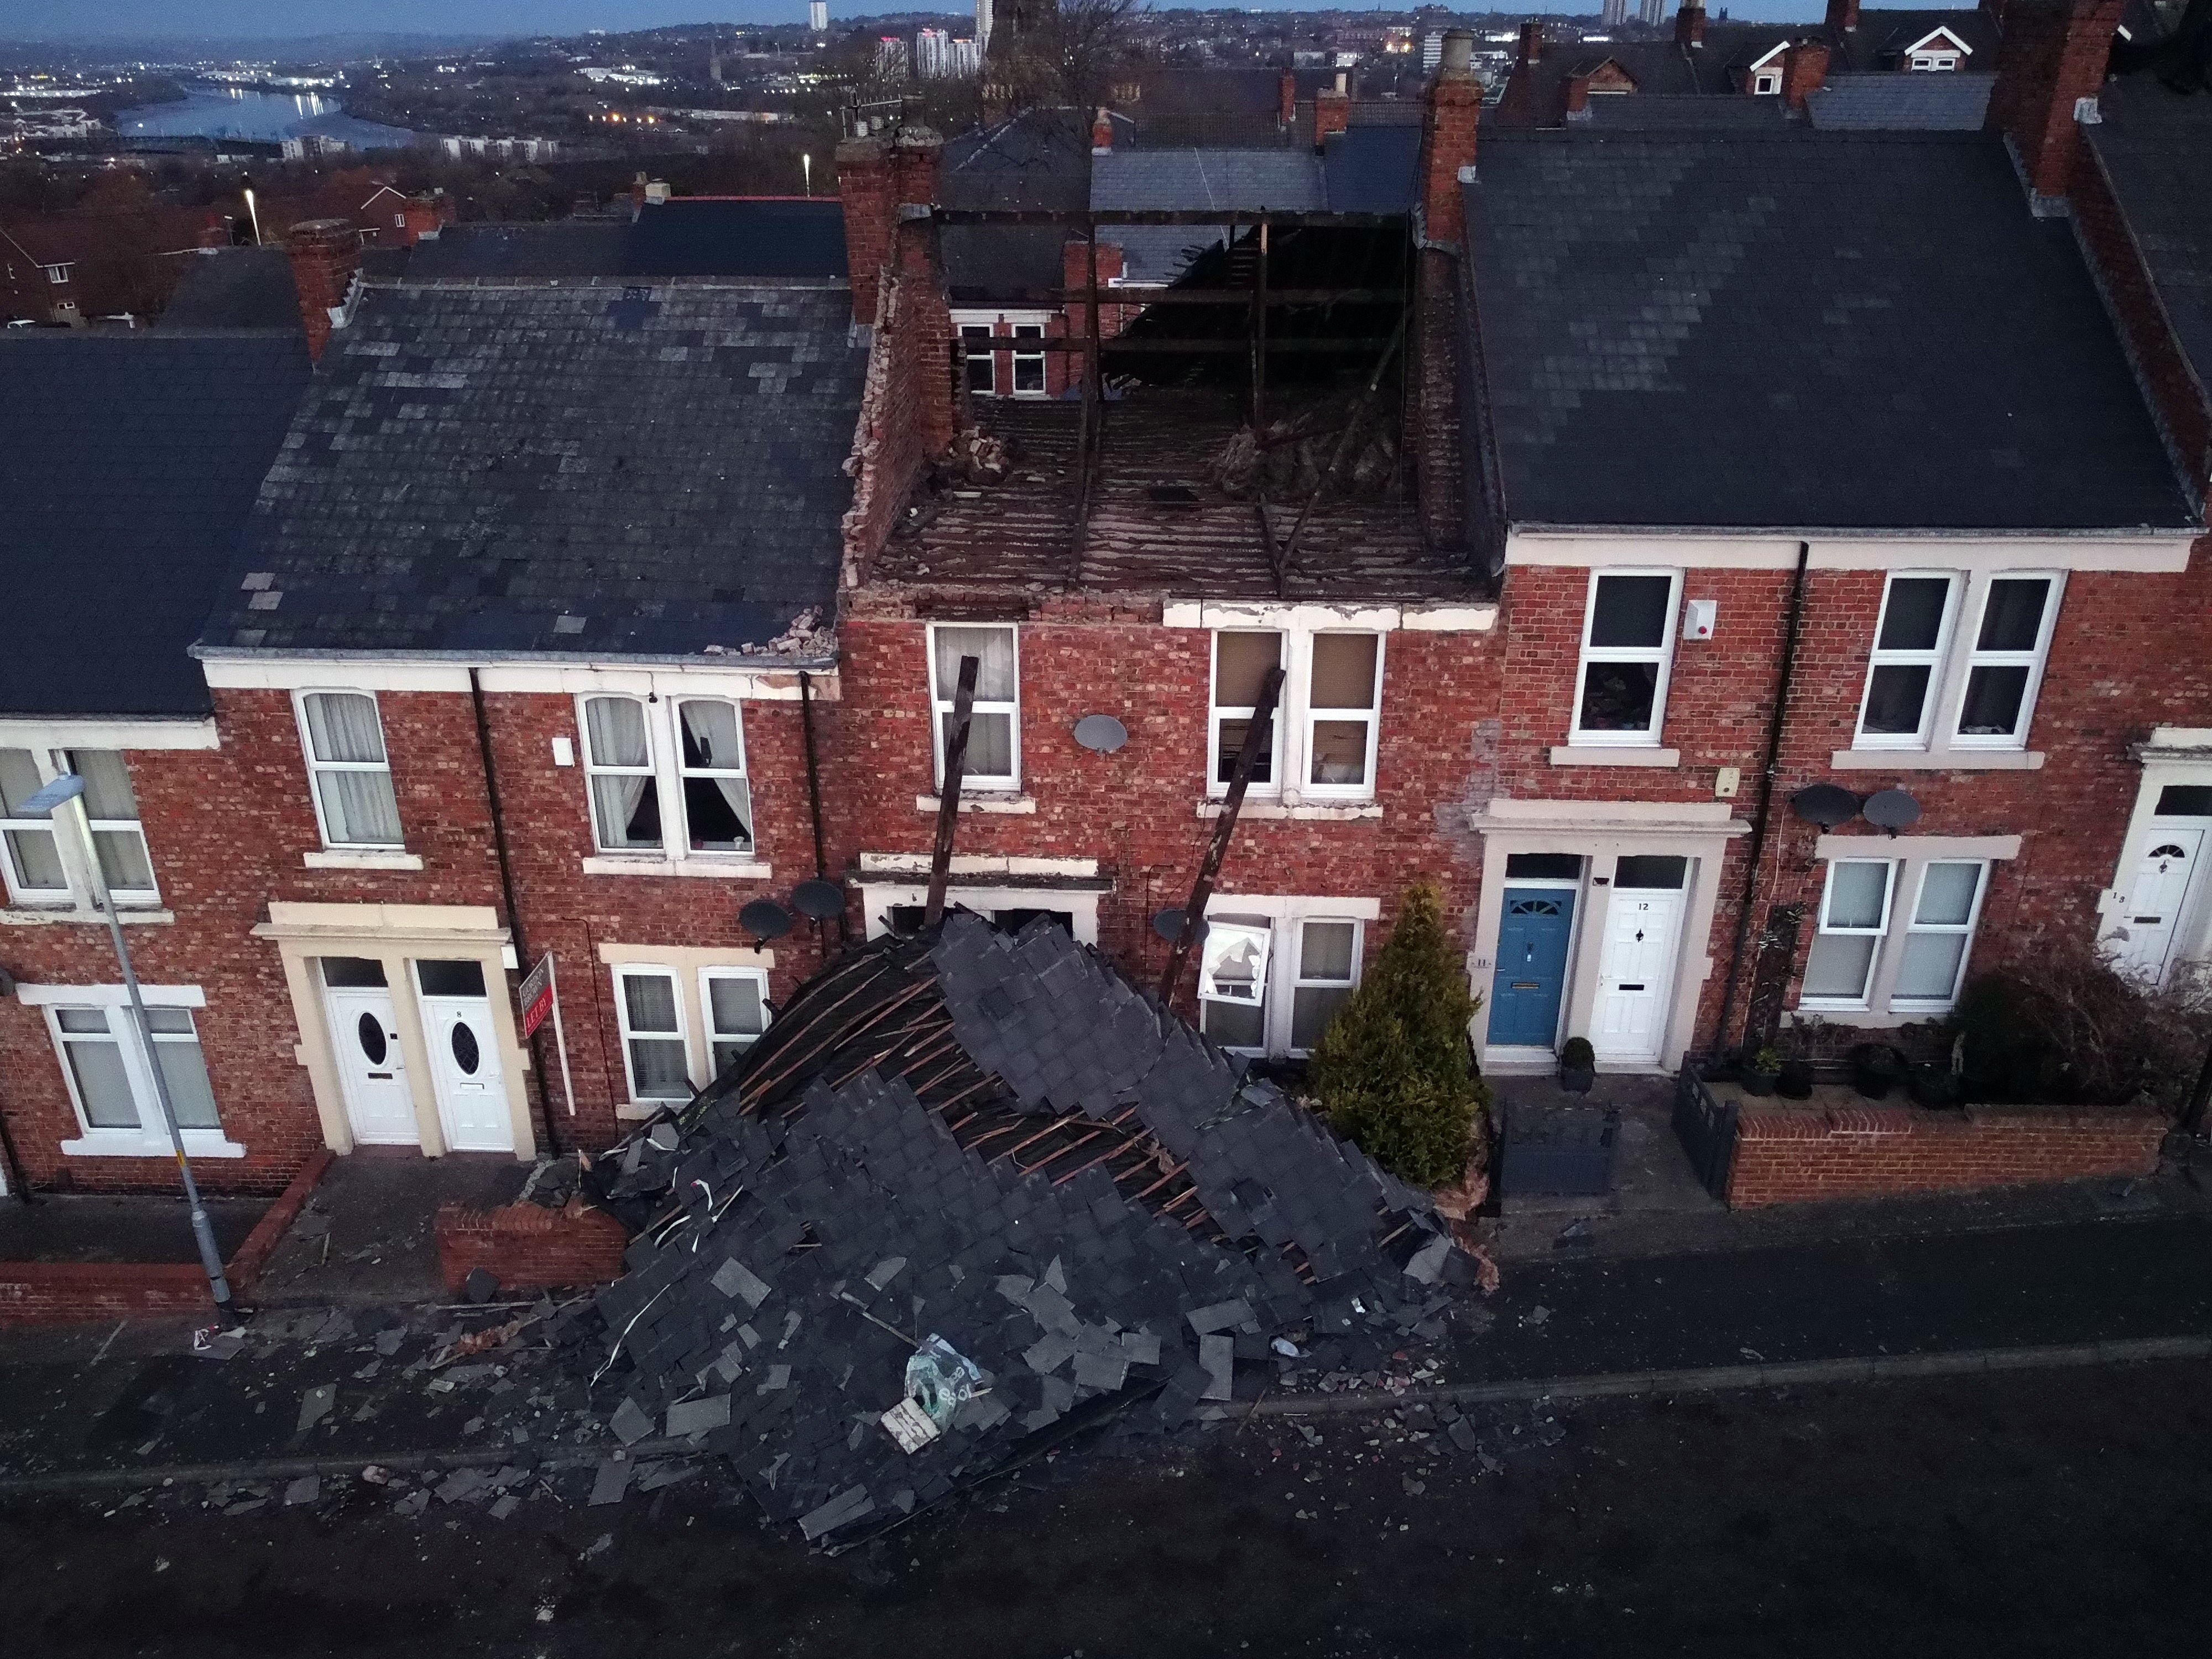 A house on Overhill terrace in Bensham Gateshead which lost its roof after strong winds from Storm Malik battered northern parts of the UK (Owen Humphreys/PA)